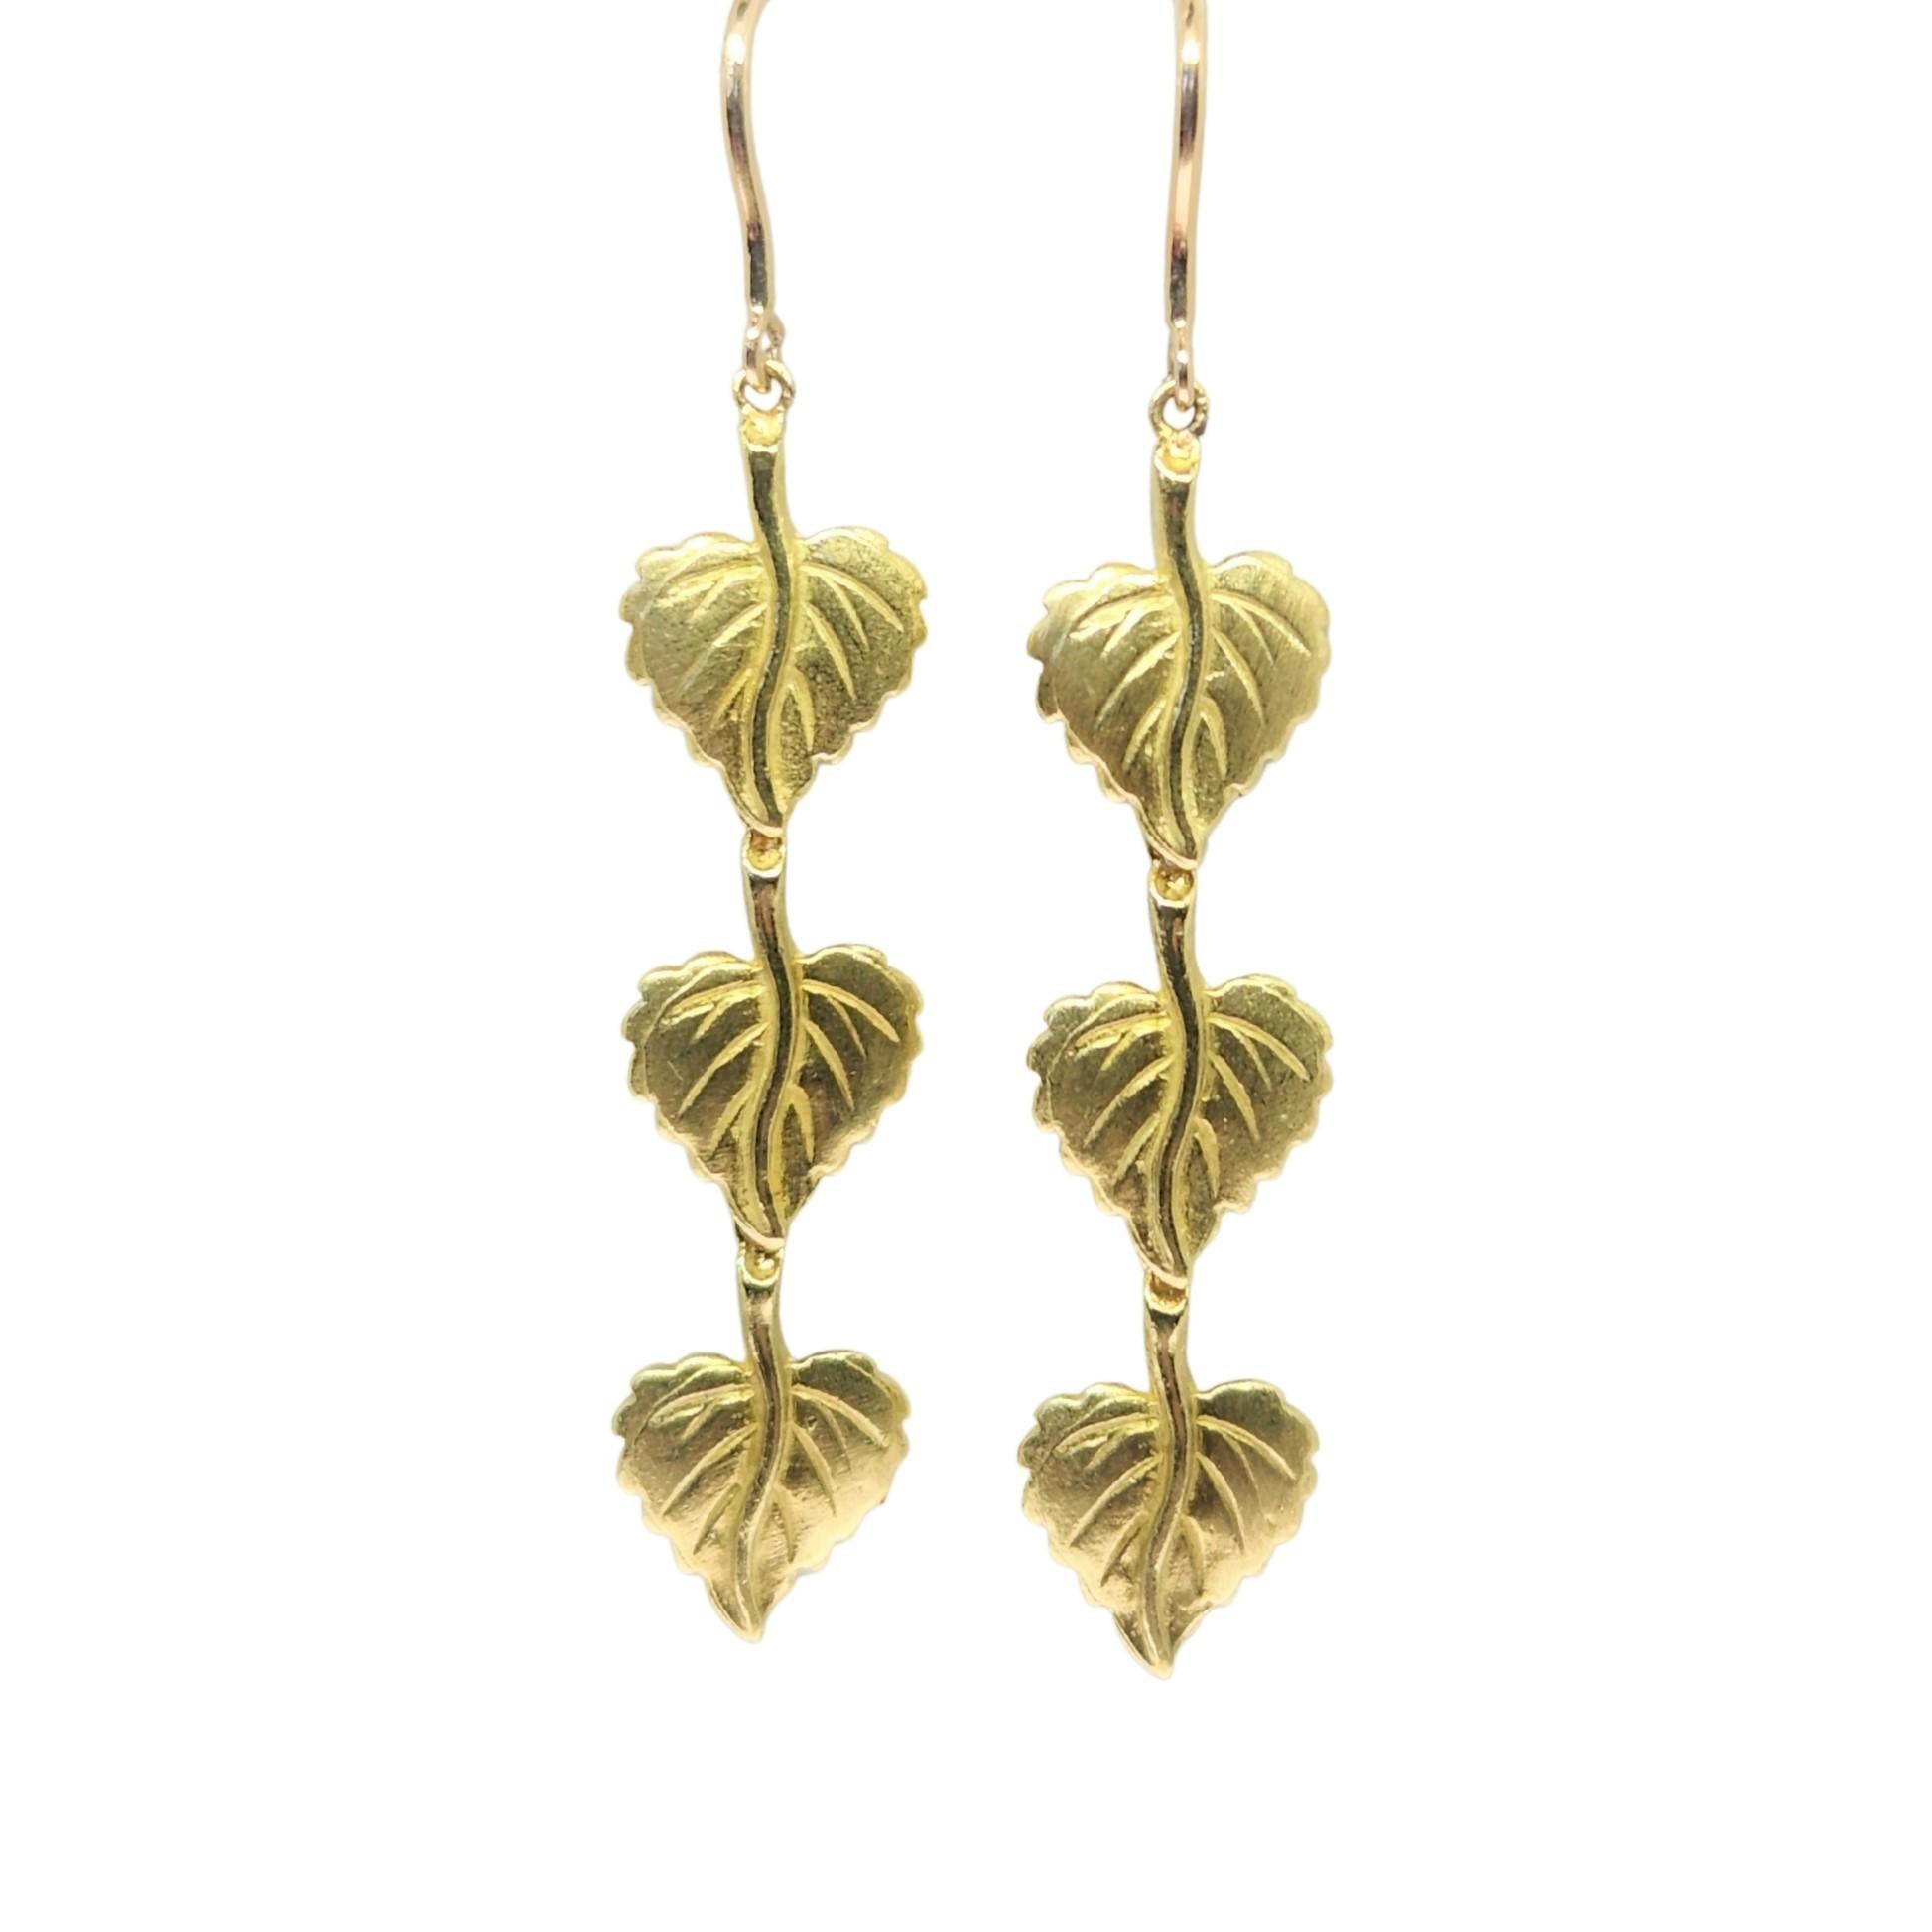 Warm 18K yellow gold drop earrings with 3 Aspen leaves that are linked for movement. Alison Nagasue incorporated her signature matte with polish finishing for a subtle natural and laid back look. The reverse side of the leaves has handmade texturing